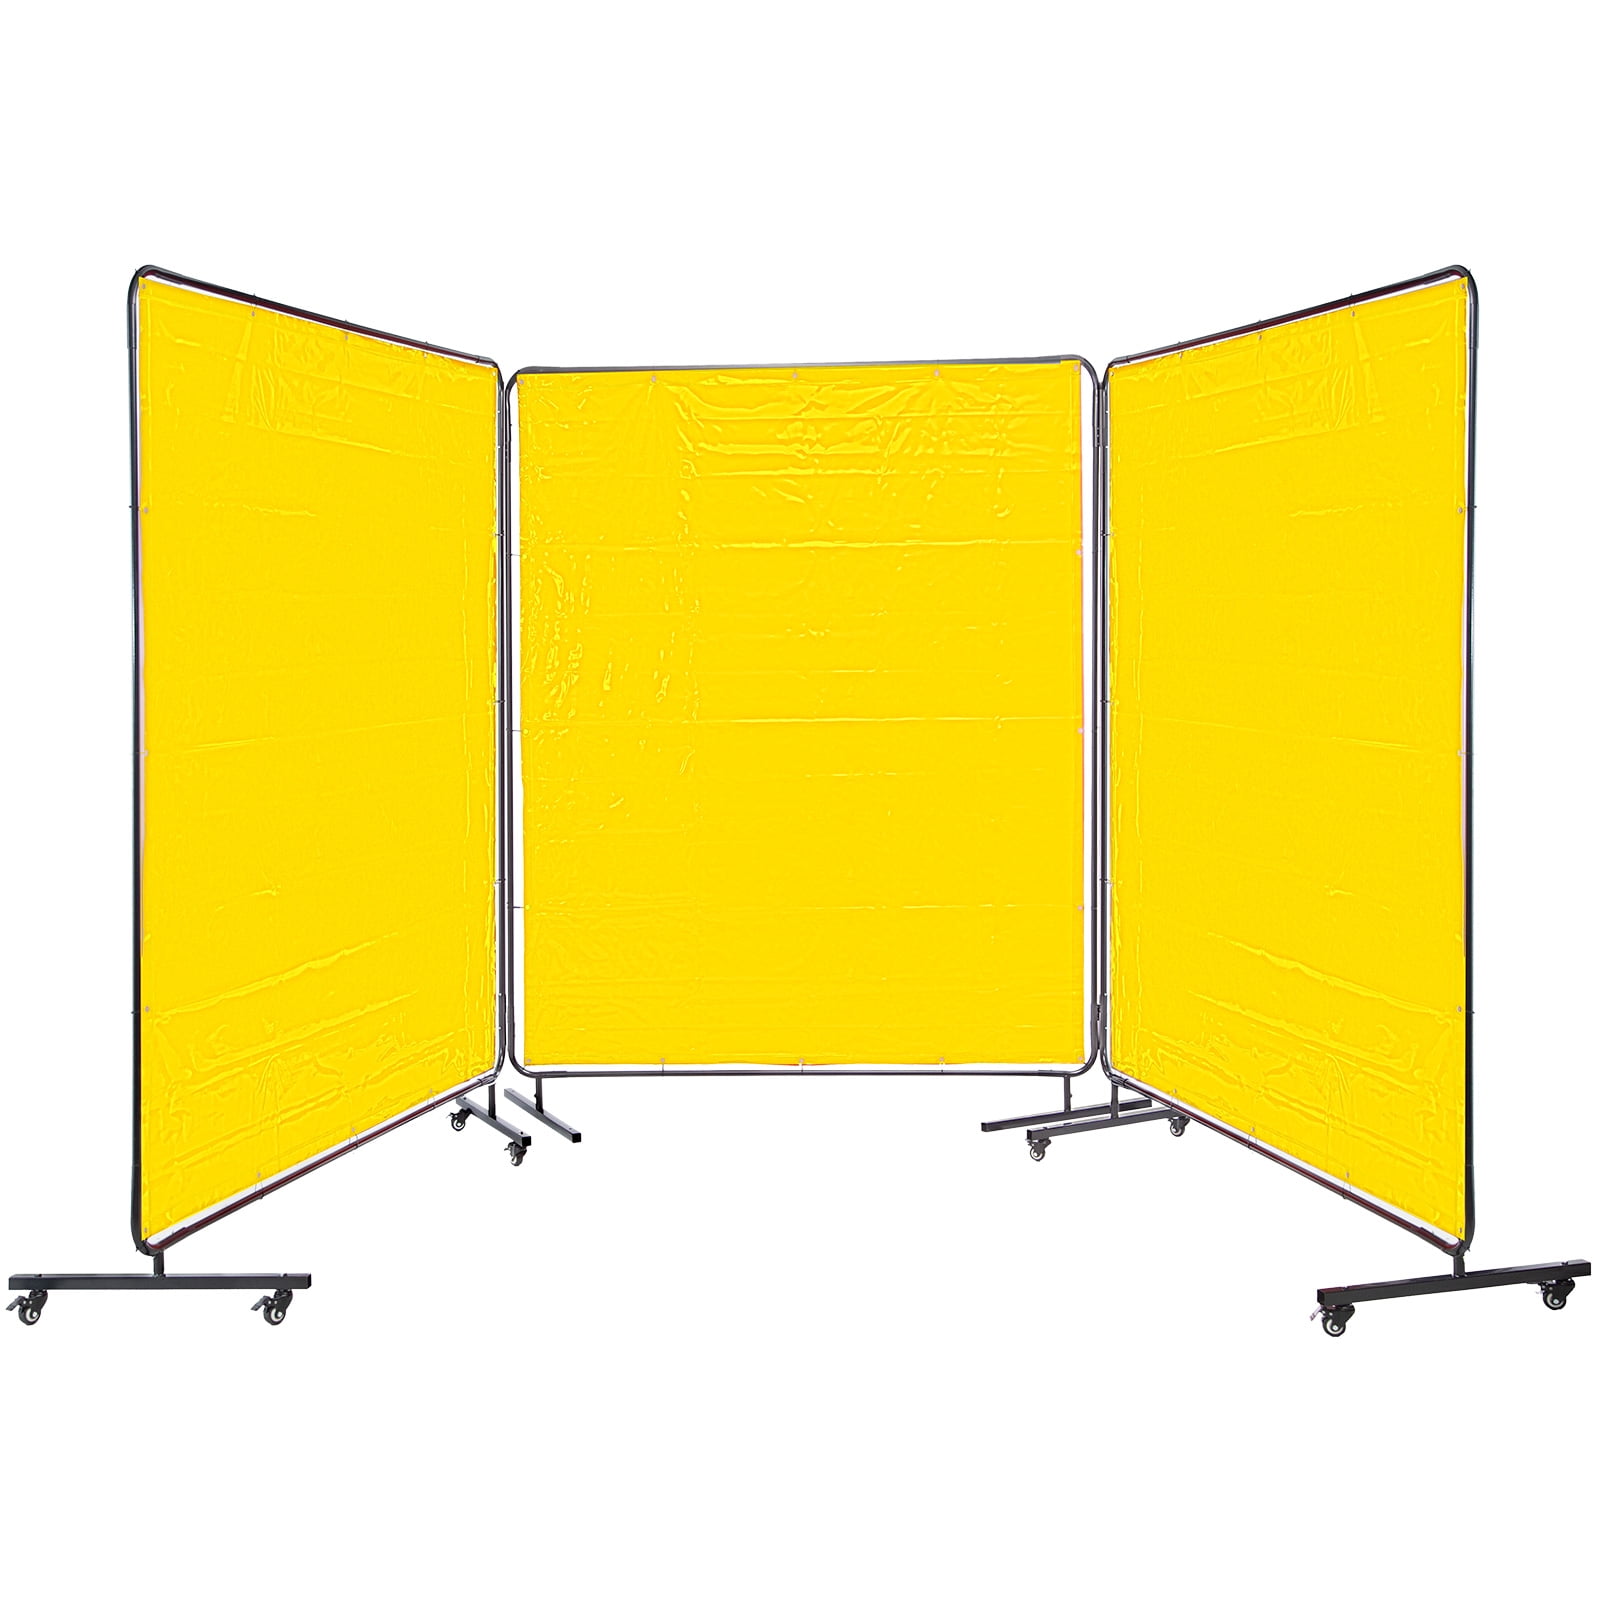 Flame Resistance Weld Curtain VEVOR Welding Curtain 6 x 6 Welding Screens Flame Retardant 3 Panel Welding Curtain with Frame and Wheels Adjustable Size Translucent Welding Shield Red 